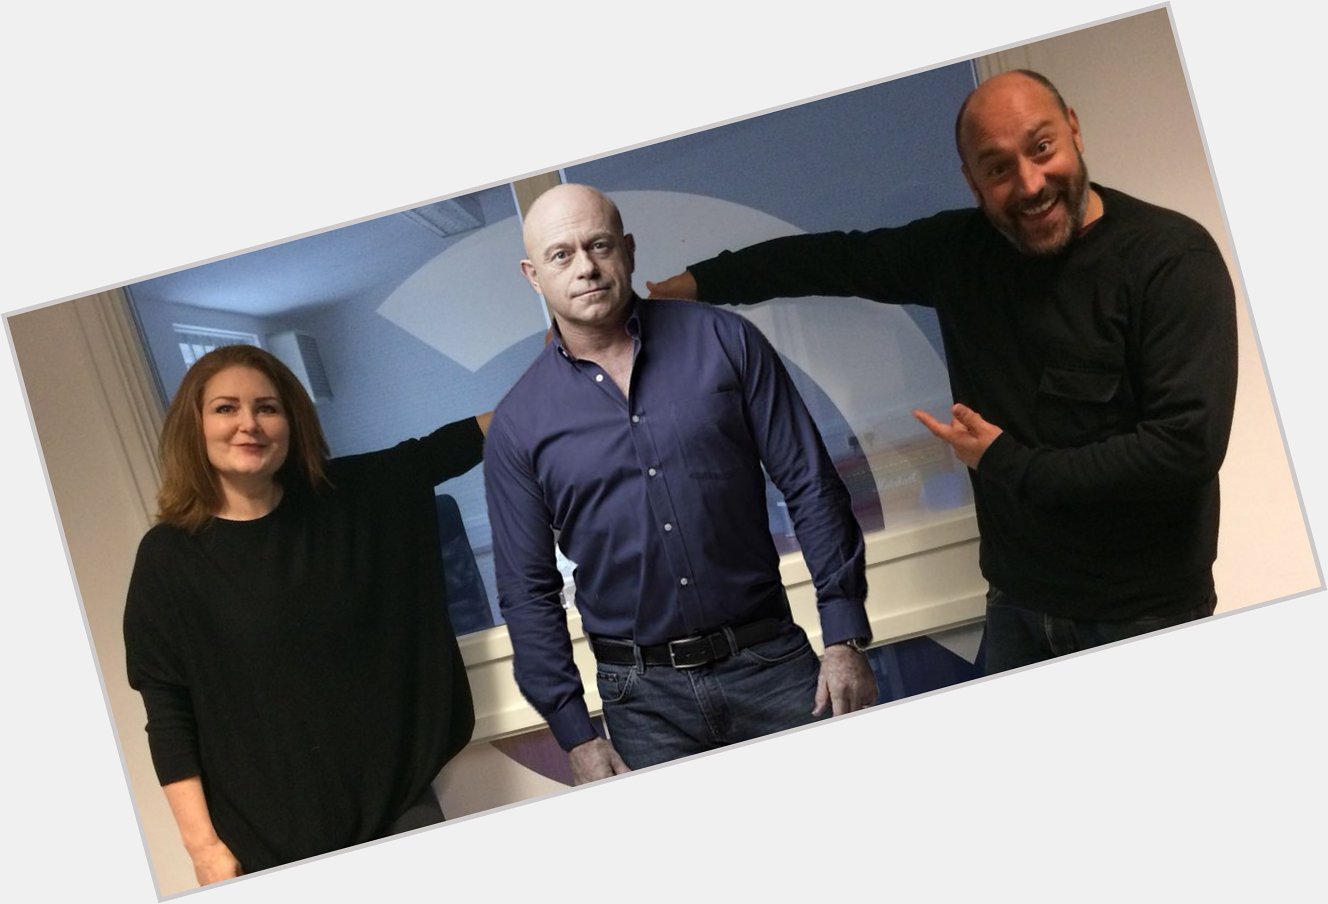 Photoshop Friends! Happy Birthday to ROSS KEMP! Here he is, laughing and joking with us. 